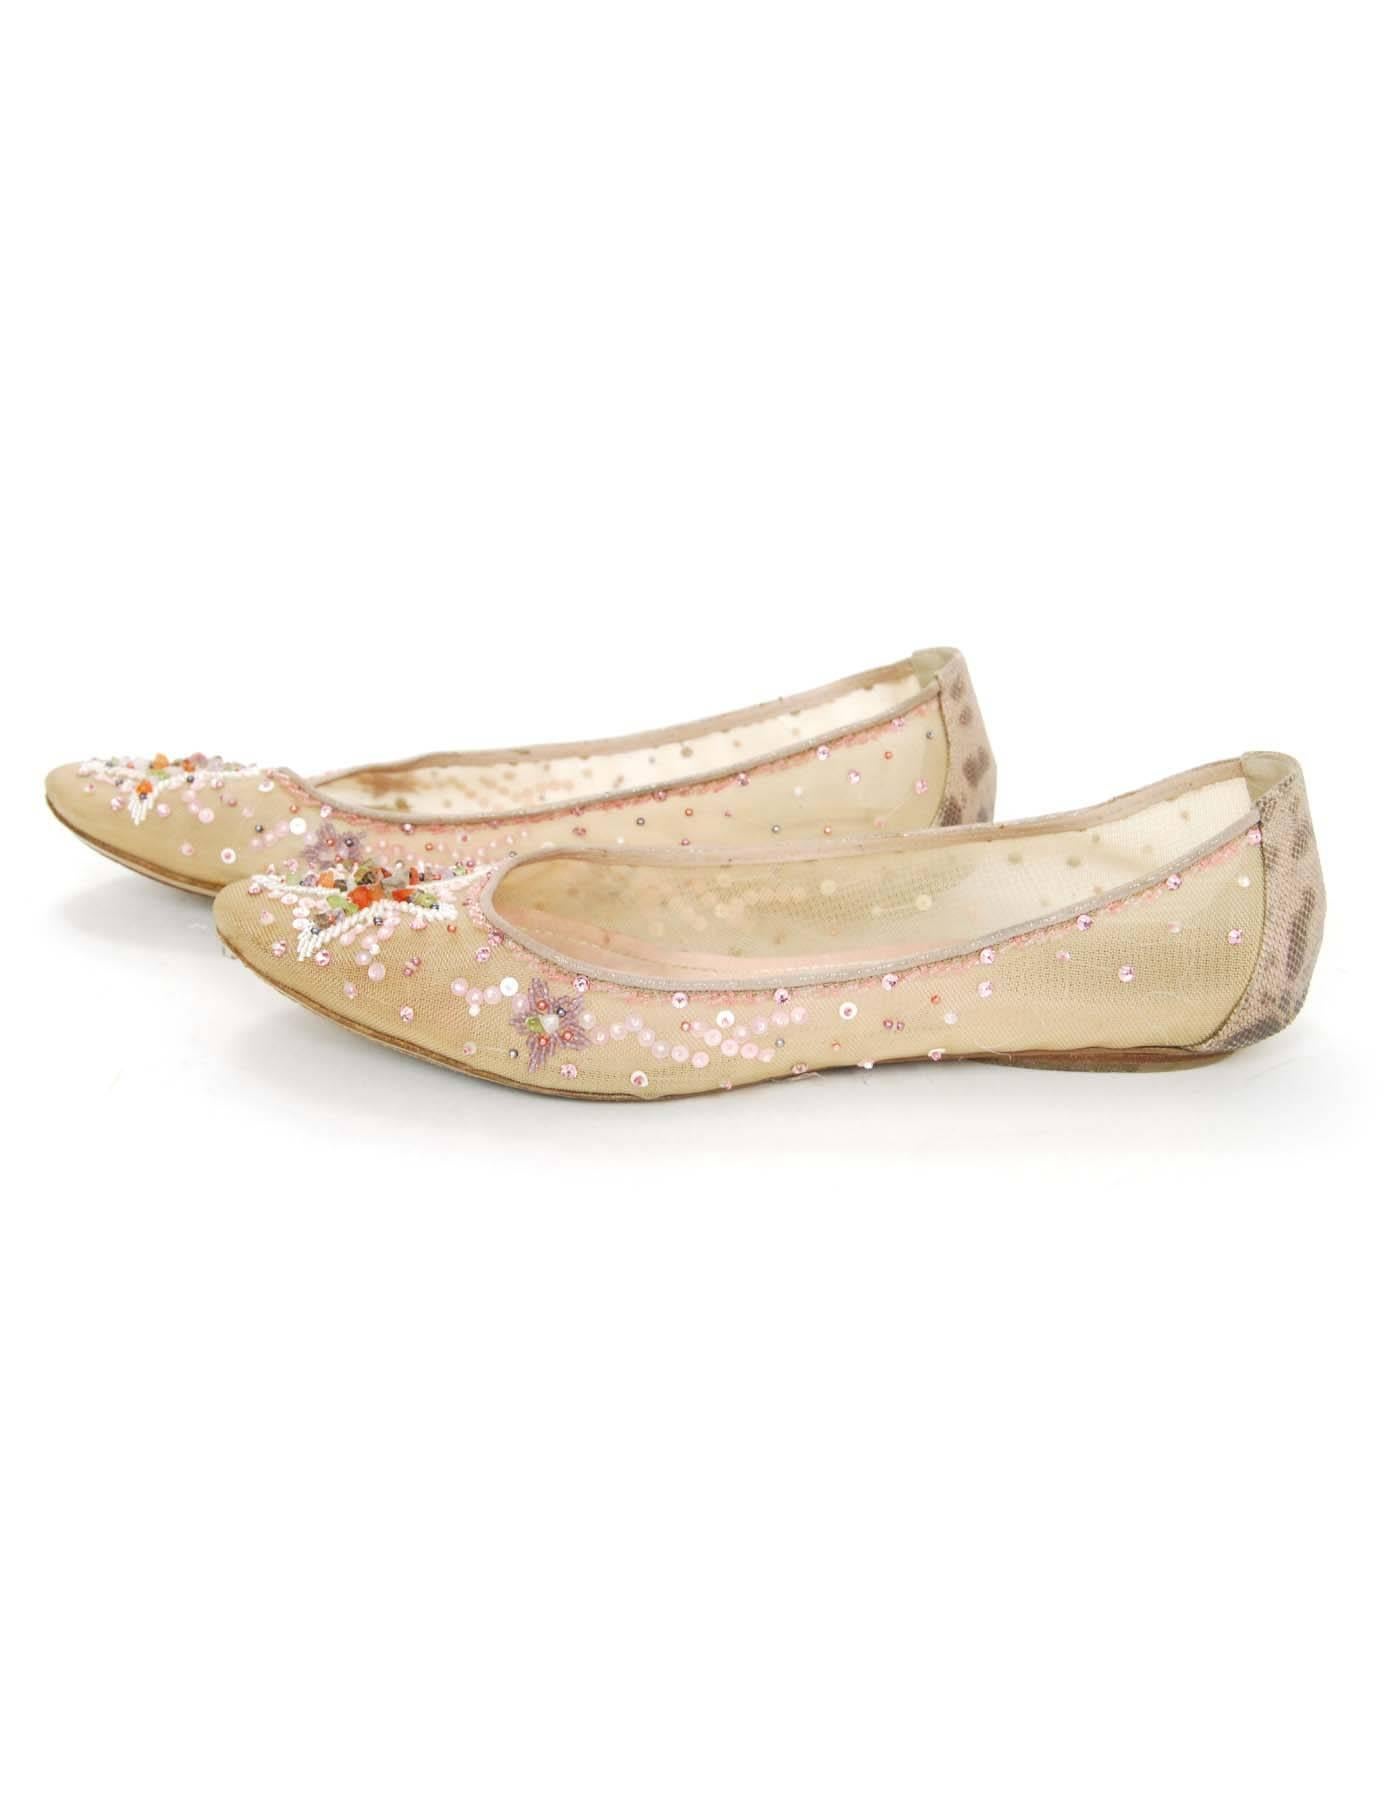 Rene Caovilla Beige Beaded Ballet Flats Sz 40

Features mesh and beading throughout 

Made In: Italy
Color: Beige and multi color beads
Materials: Mesh and beads
Closure/Opening: Slide on
Sole Stamp: Made in Italy 38
Overall Condition: Very